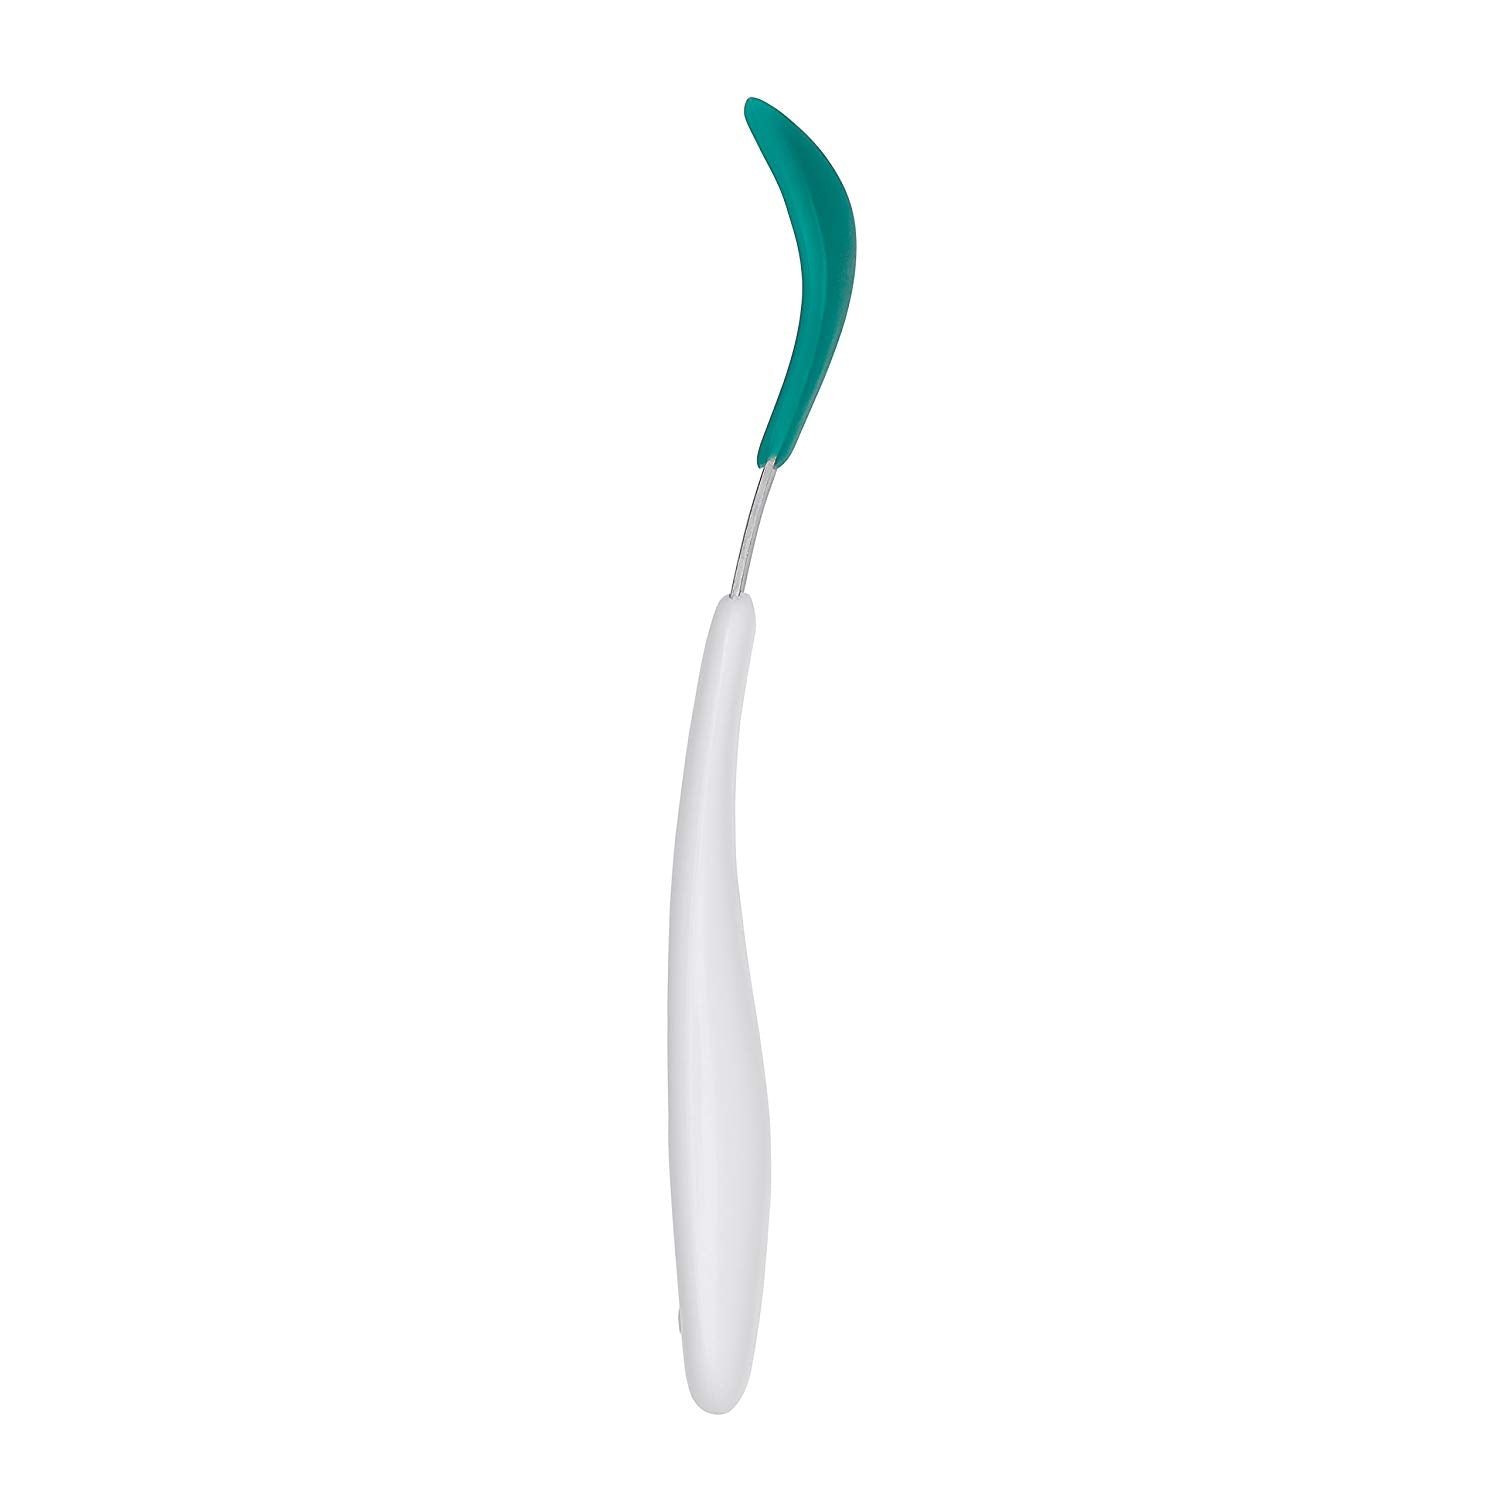 OXO TOT Feeding Spoon Set with Soft Silicone - ANB Baby -$20 - $50